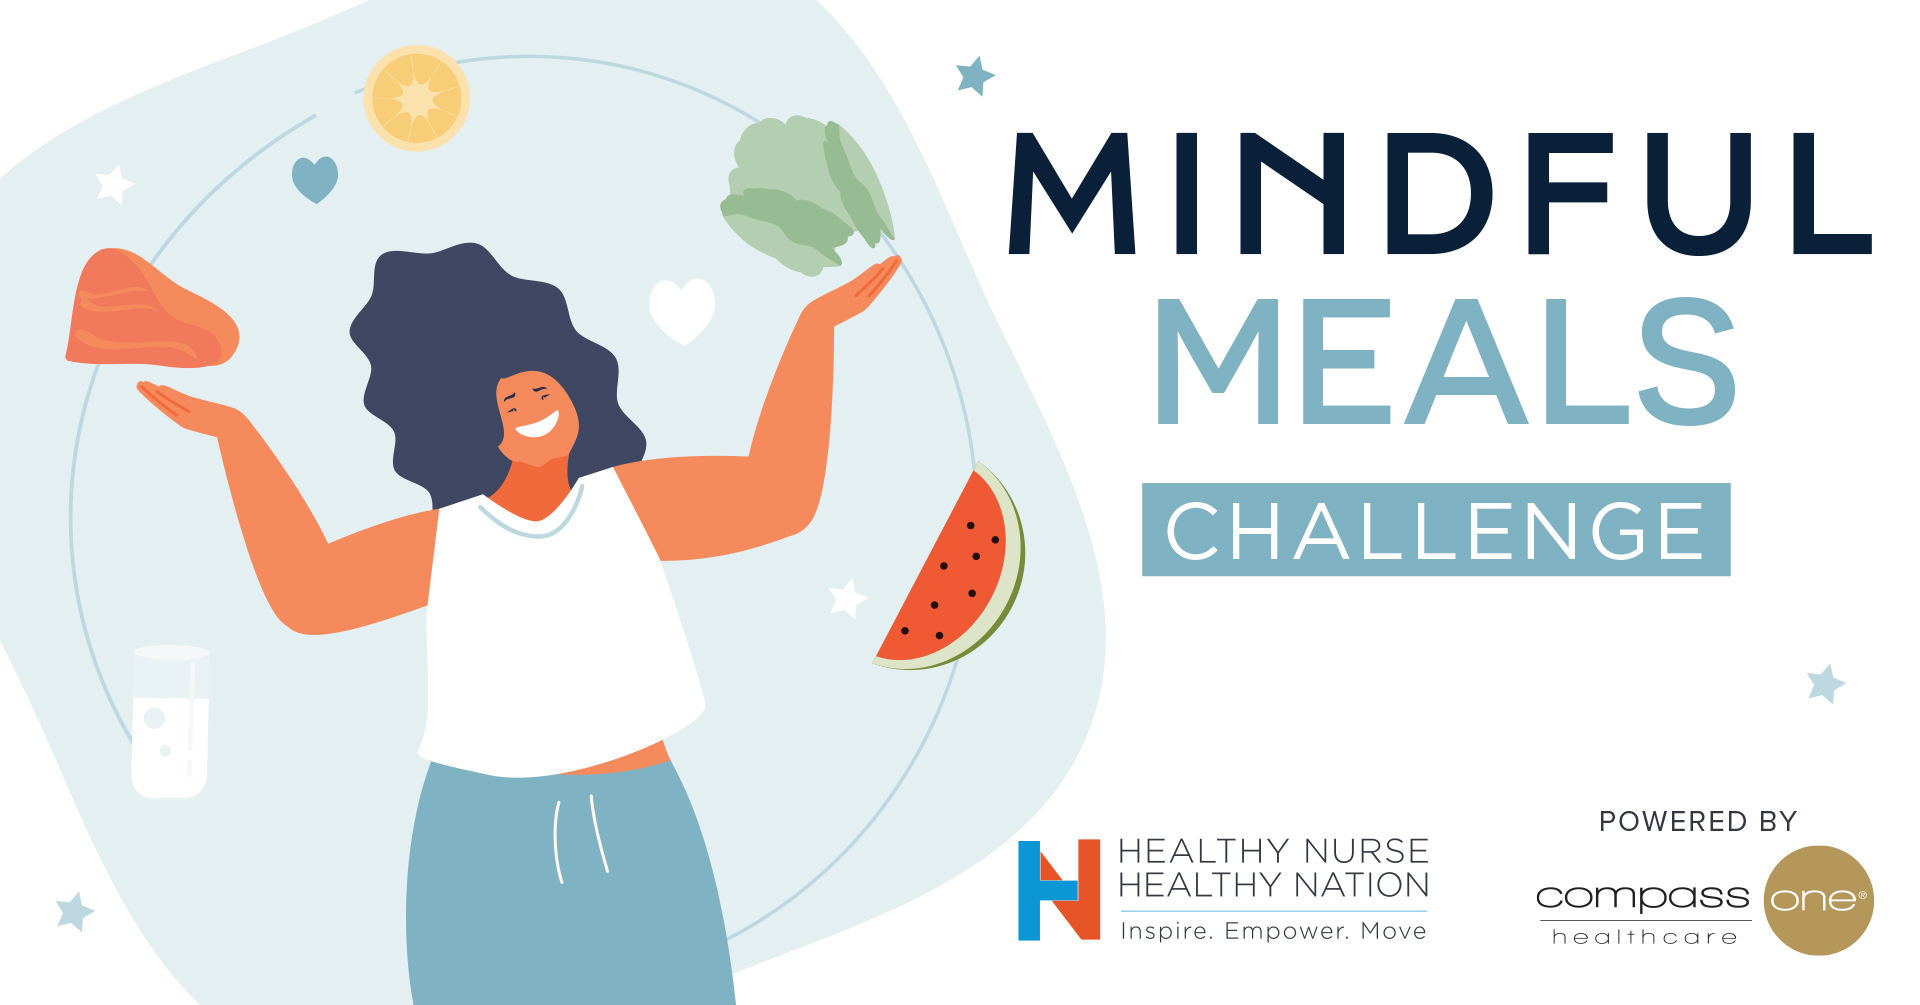 Listen To Your Body - Mindful Meals challenge, powered by Compass One Healthcare - Day 1 Tip 4345